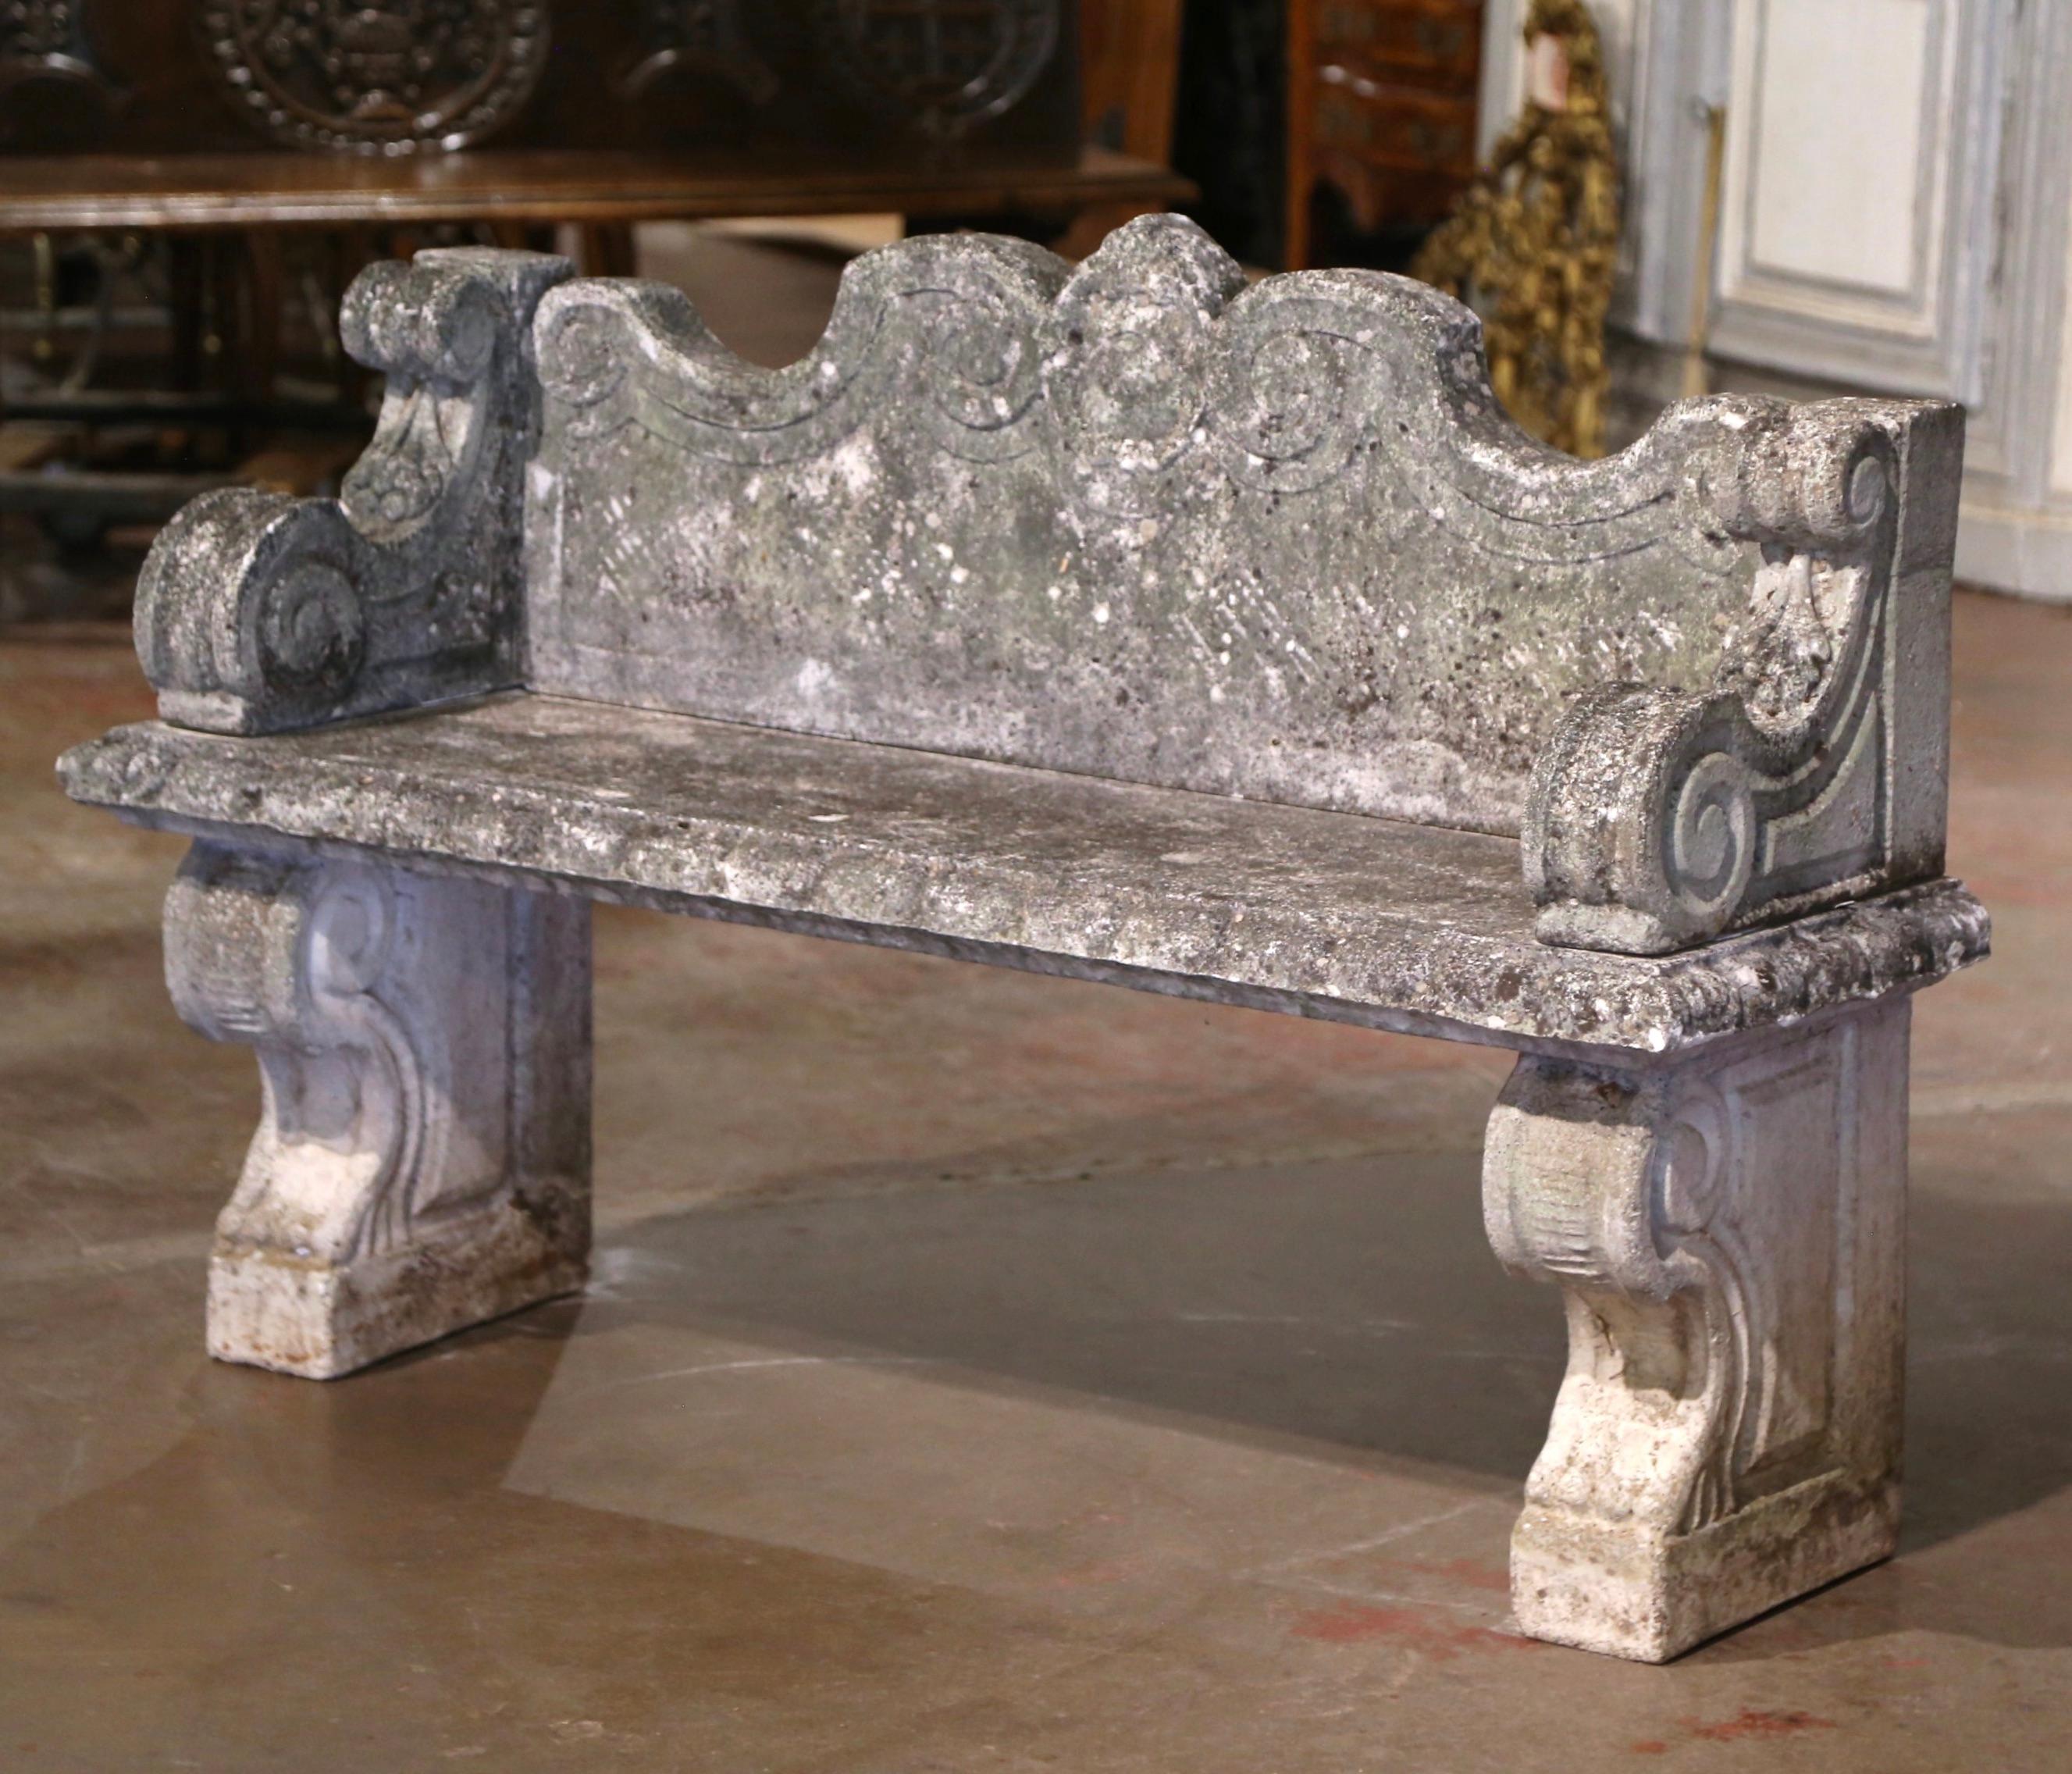 Hand-Crafted Mid-19th Century French Carved Weathered Stone Garden Bench from Normandy